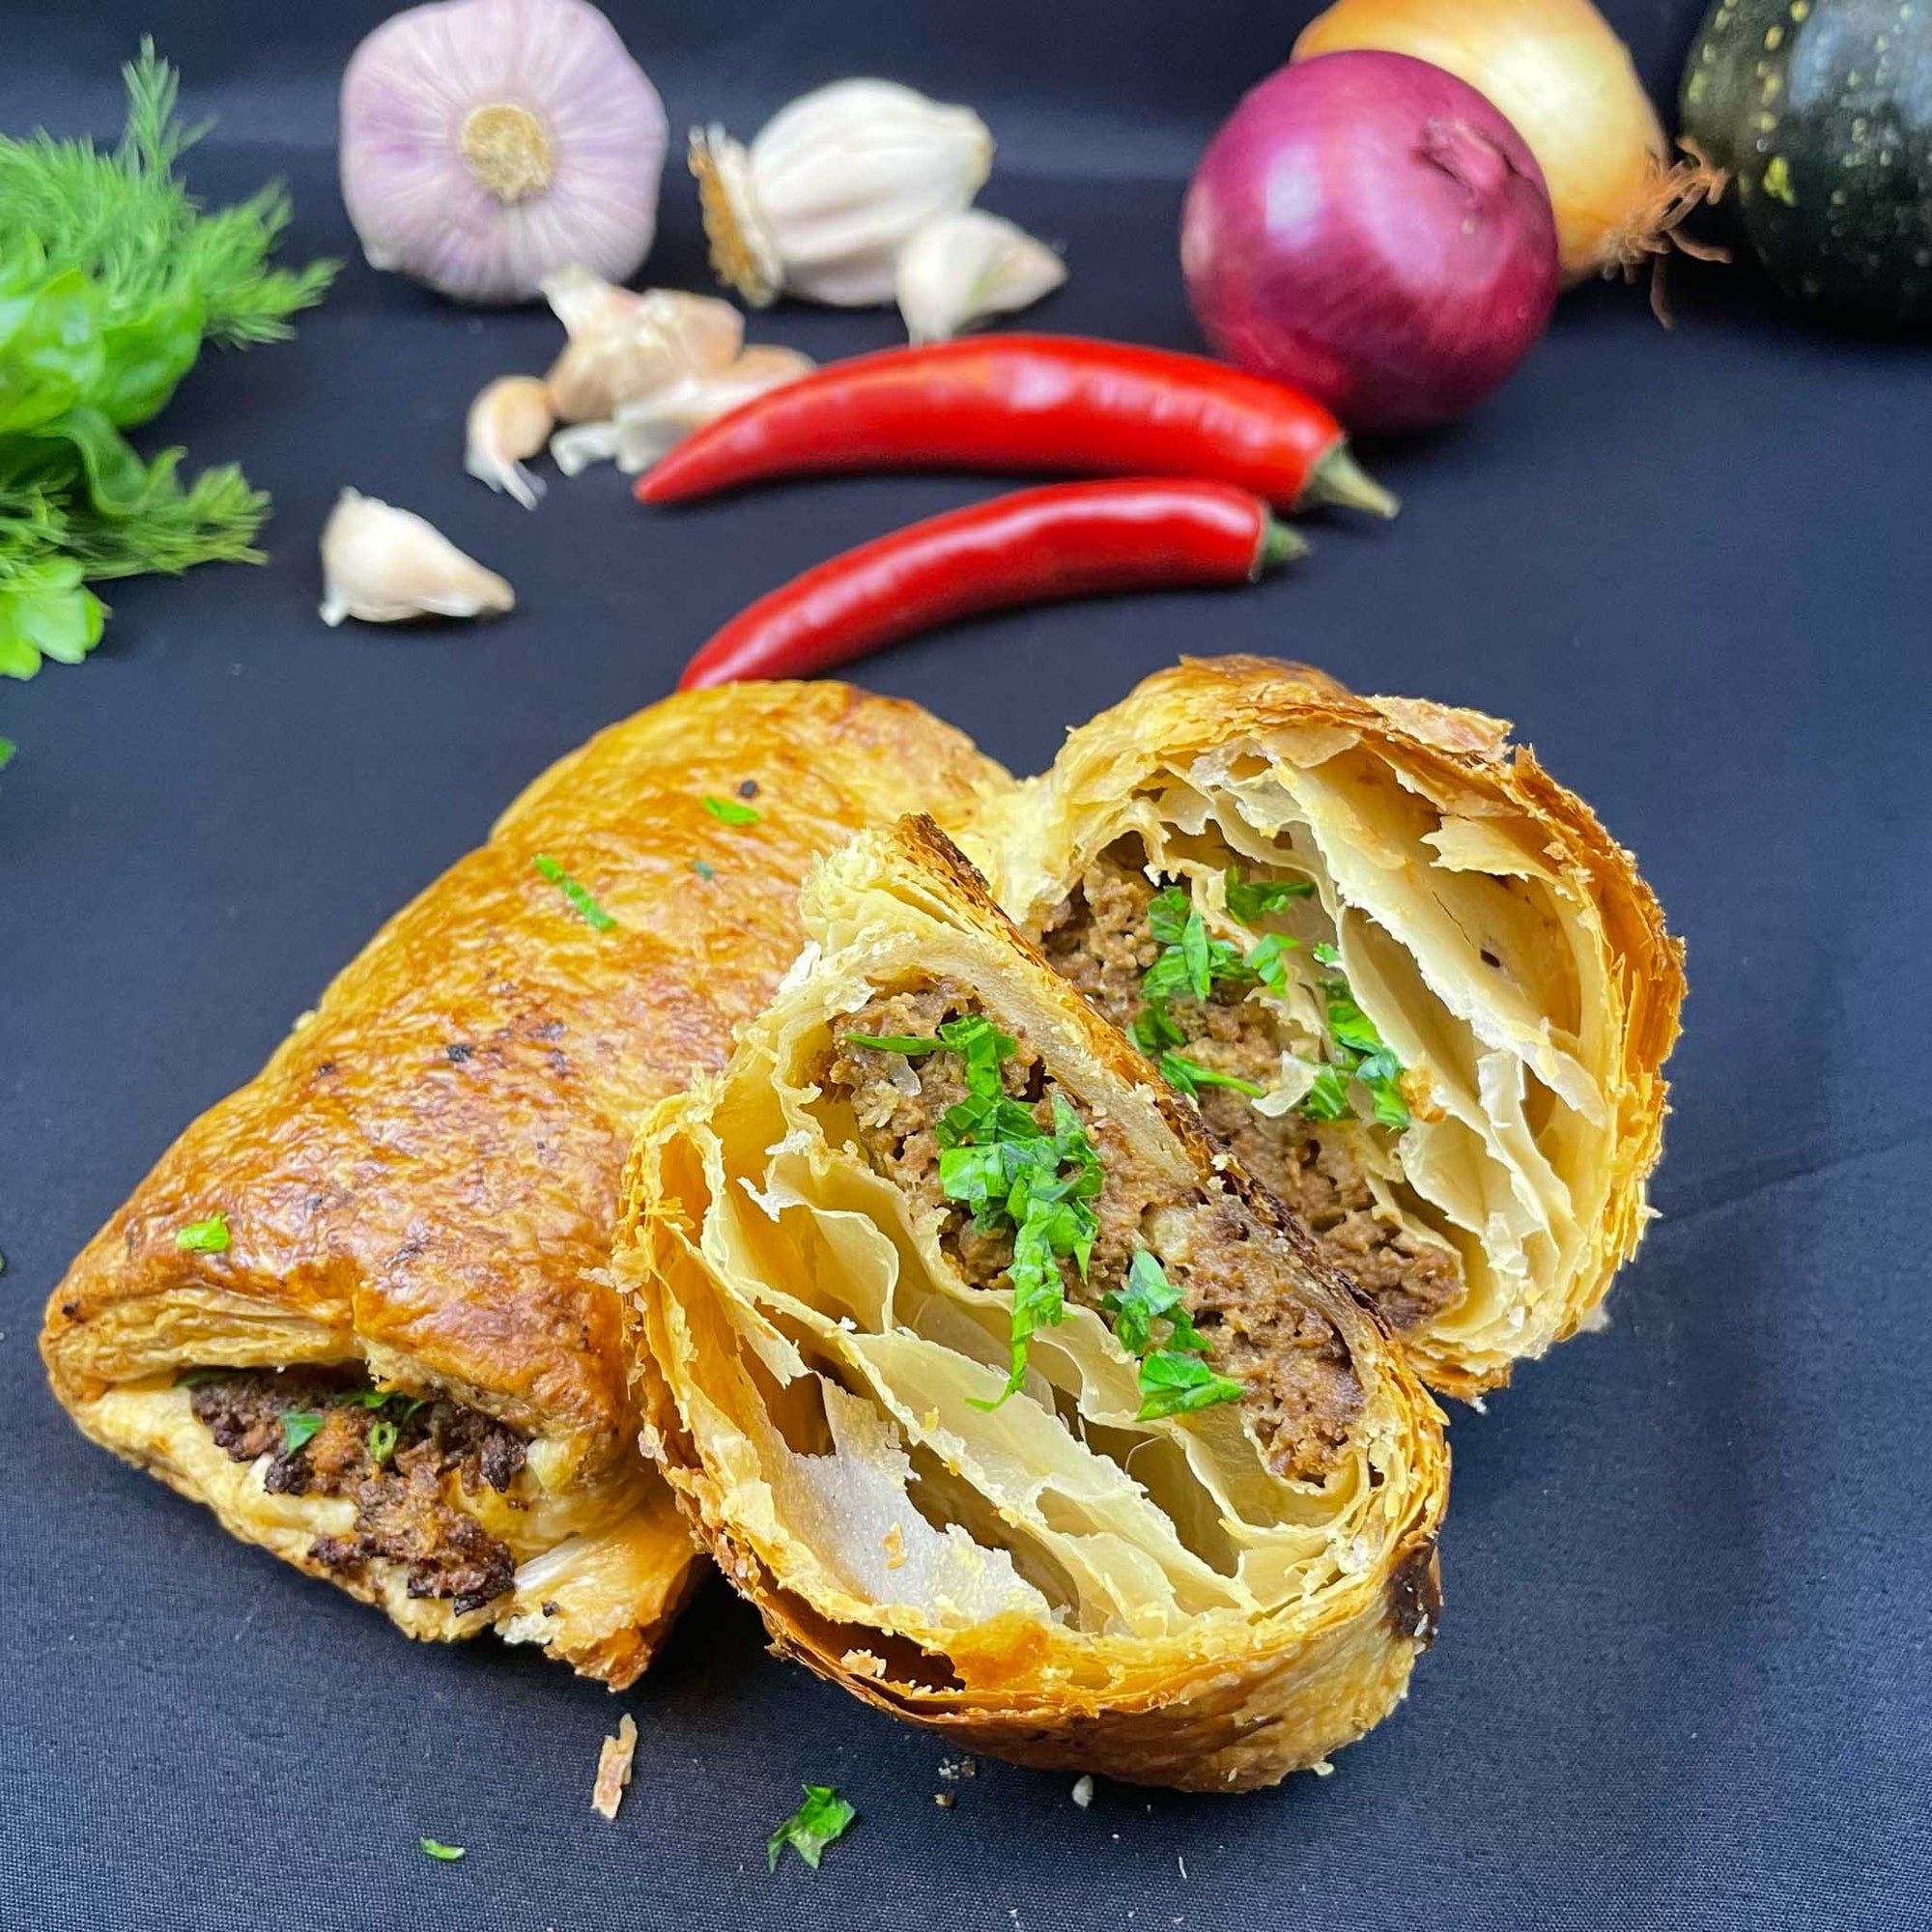 2 x Beef Sausage Rolls (bake at home)